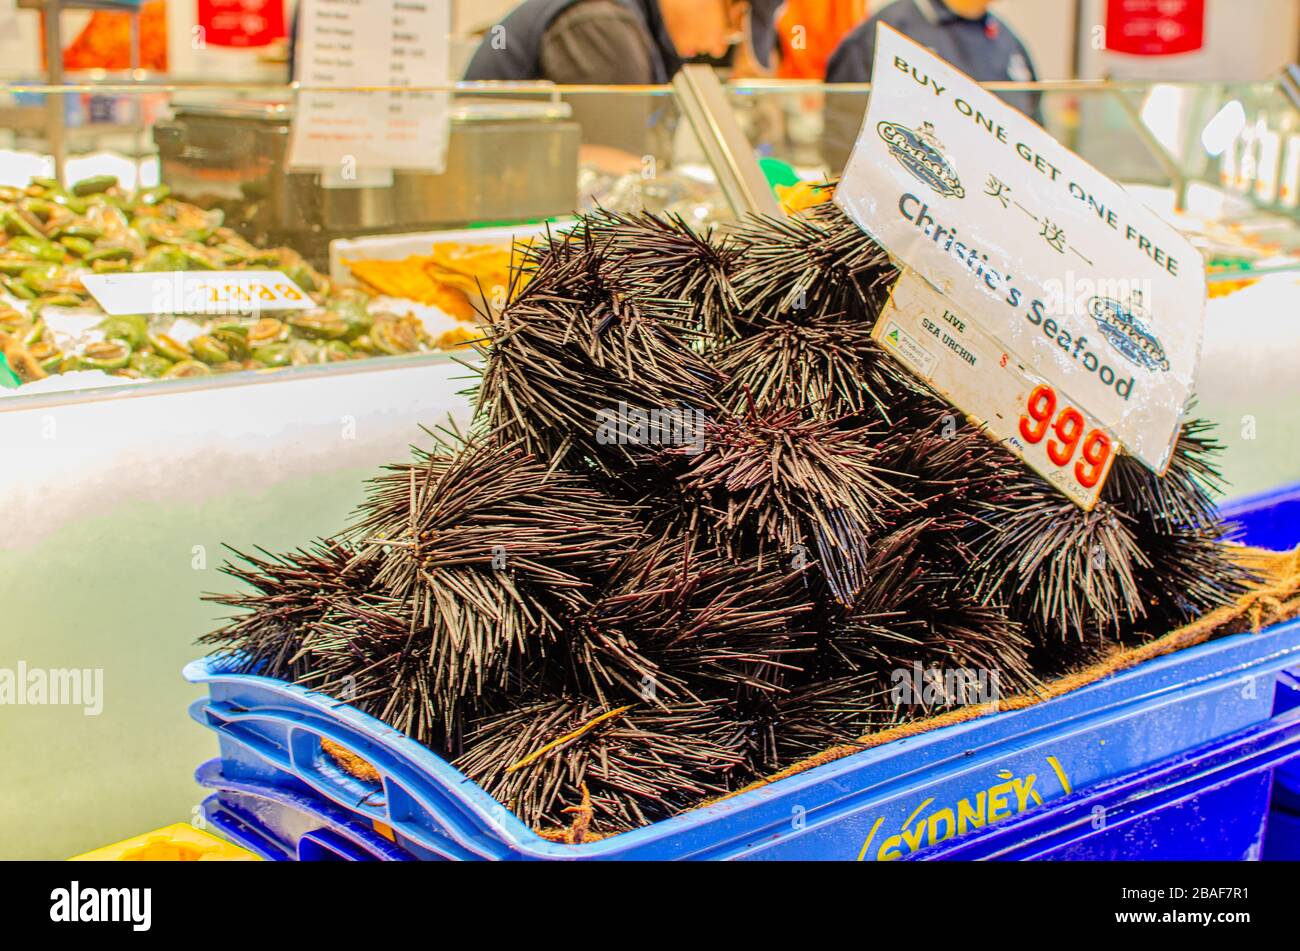 Live black sea urchin for sale at Christie's Seafoods, Sydney Fish Market Stock Photo